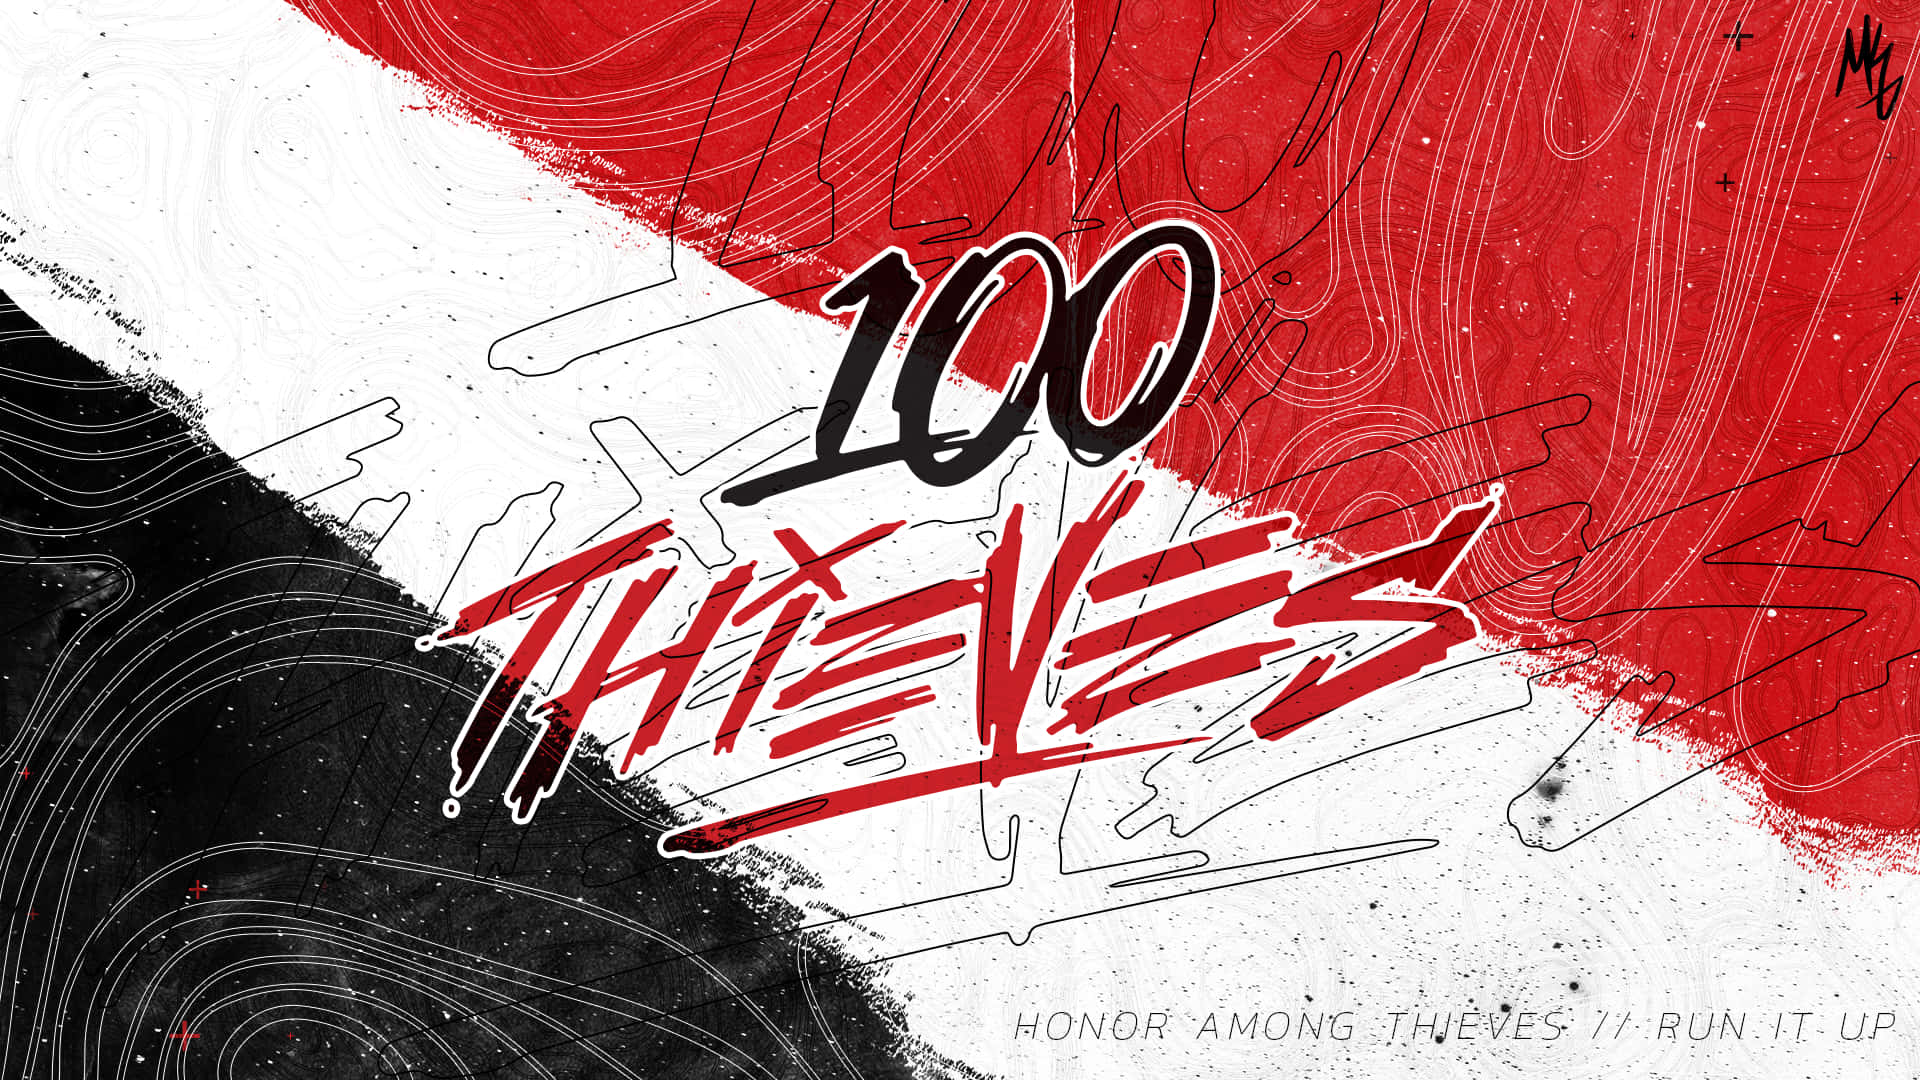 Established in 2017, 100 Thieves is a lifestyle and esports brand Wallpaper